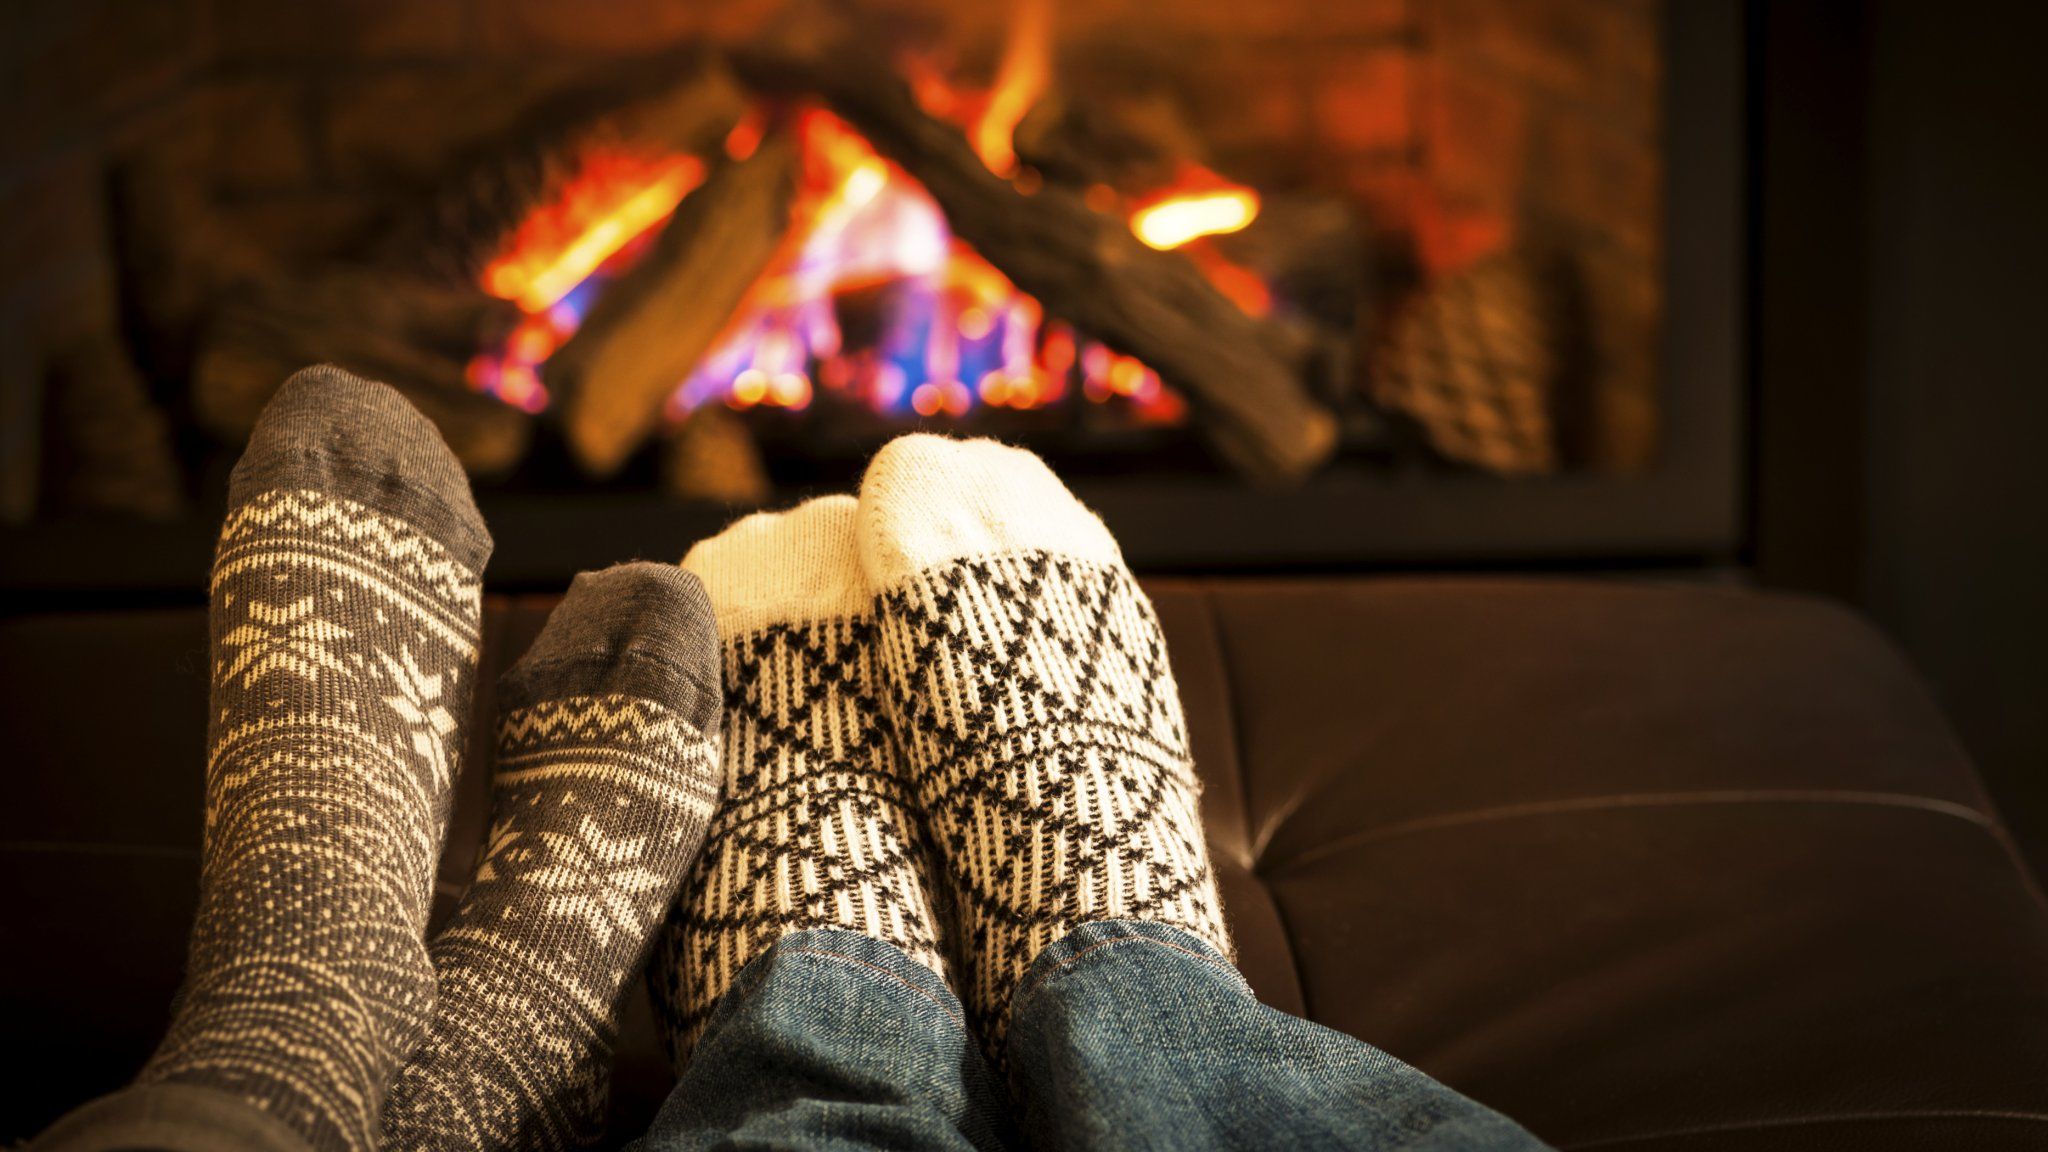 Two pairs of feet in socks in front of a roaring fire